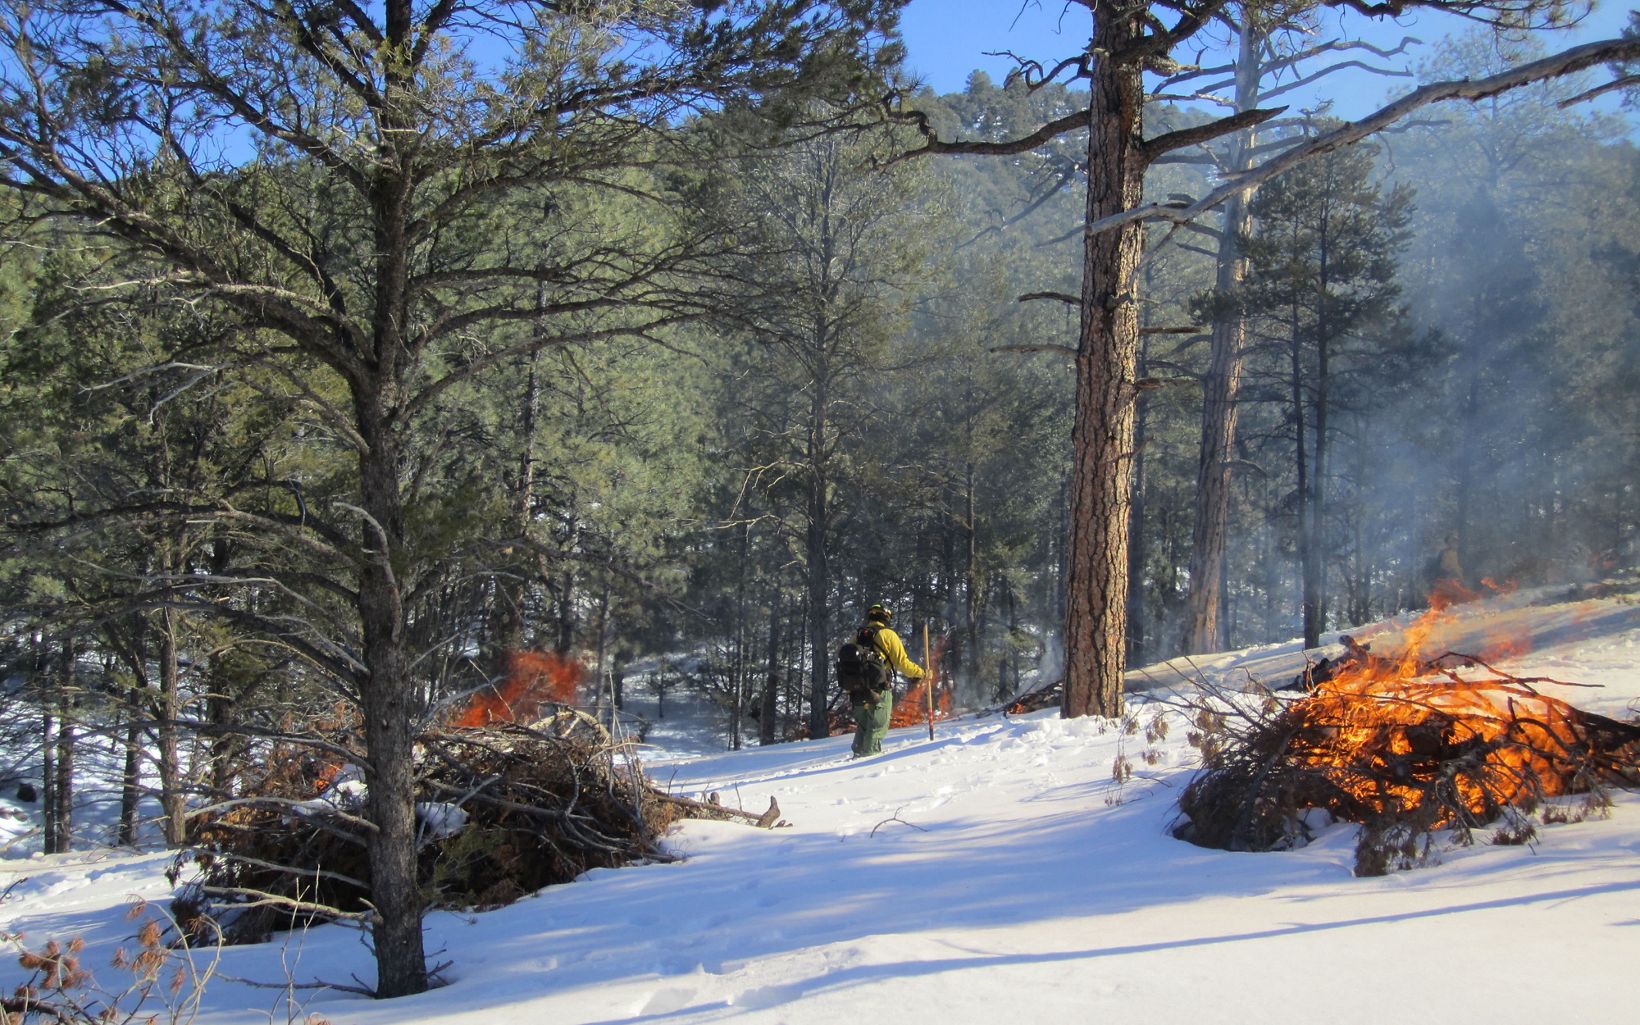 A man in yellow and green safety clothing monitors a small fire in the forest. The ground has a solid coating of white snow.